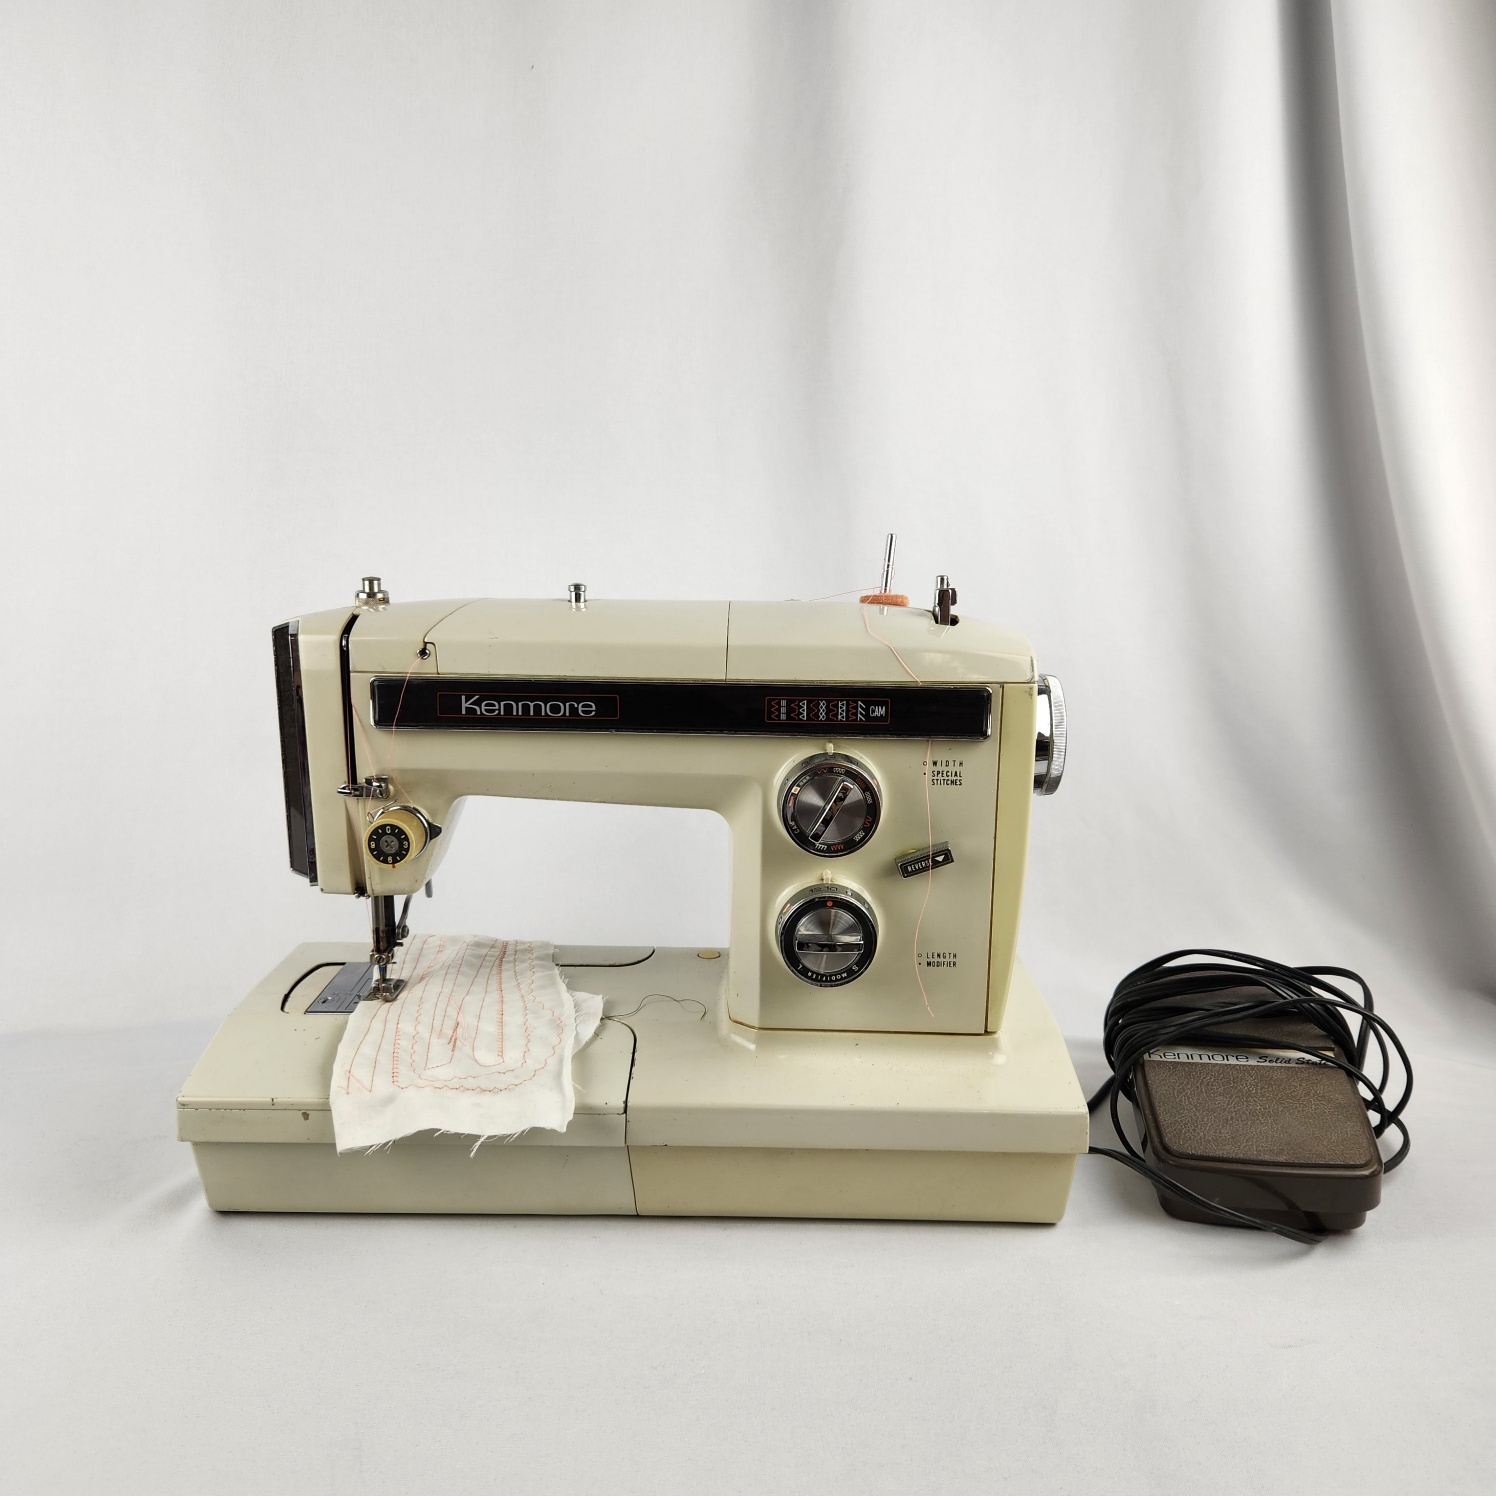 VTG Kenmore Sewing Machine - Assistance League of Tucson